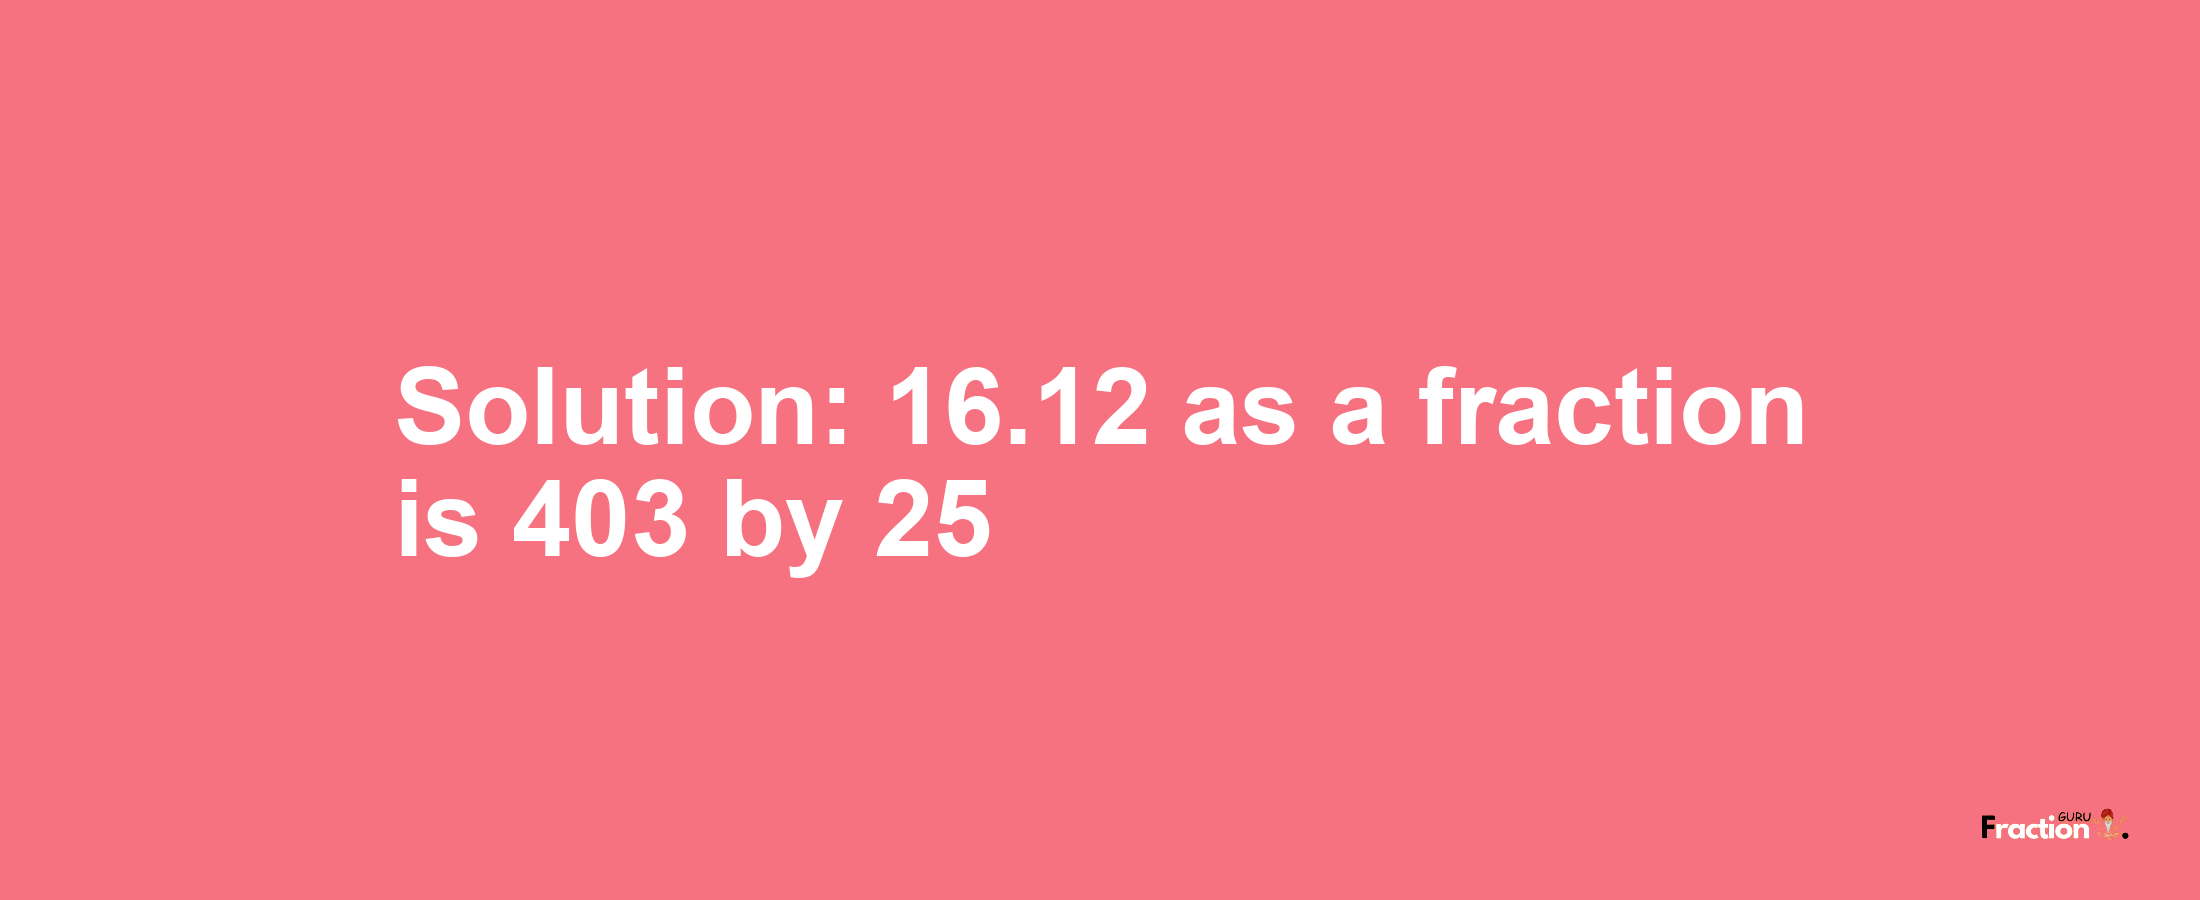 Solution:16.12 as a fraction is 403/25